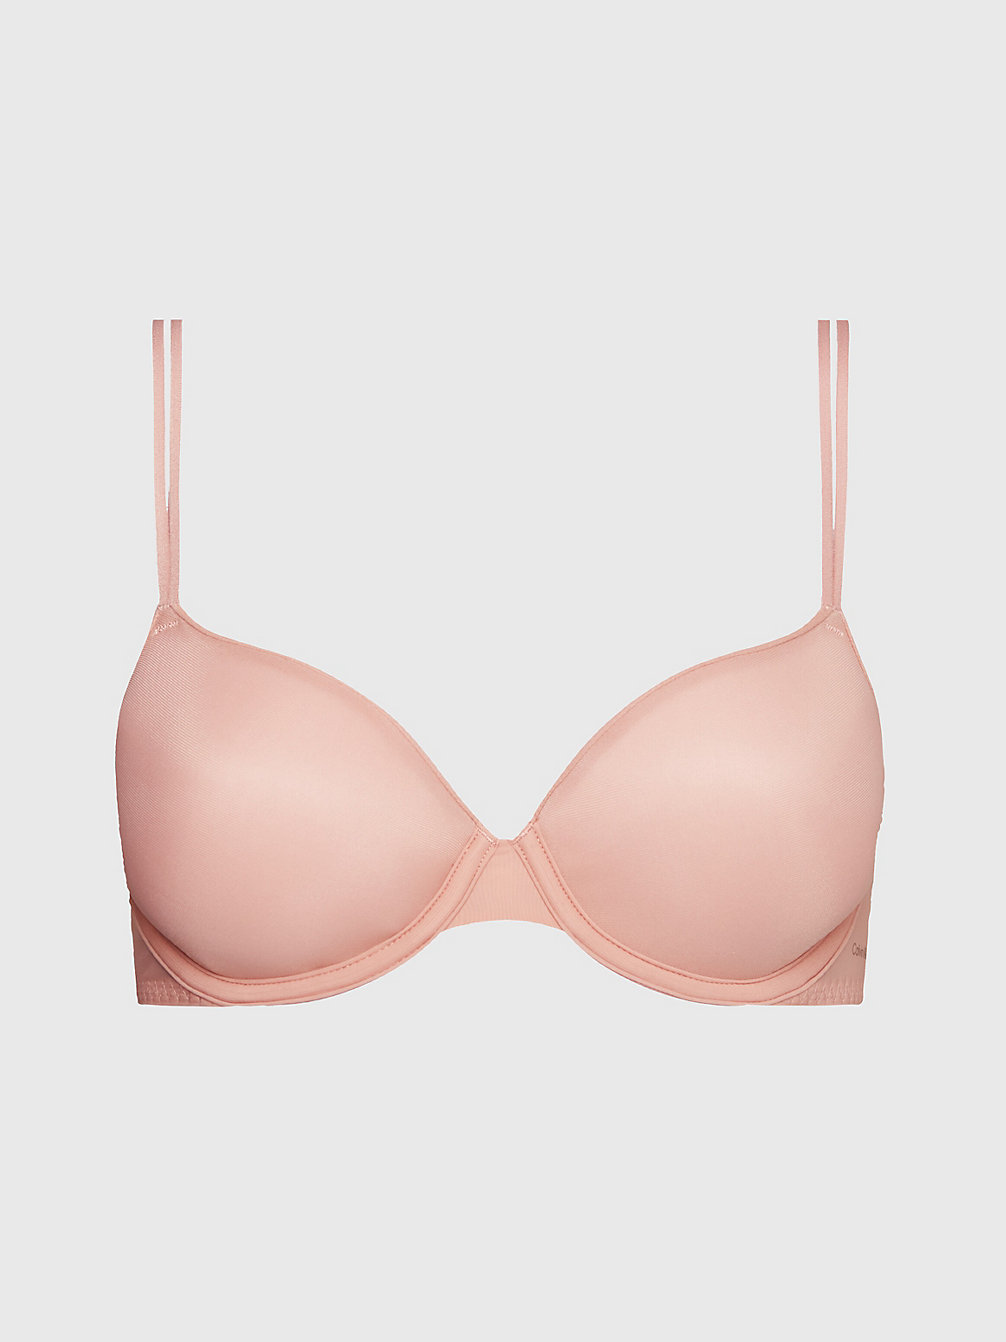 Soutien-Gorge Invisible - Sheer Marquisette > SUBDUED > undefined femmes > Calvin Klein